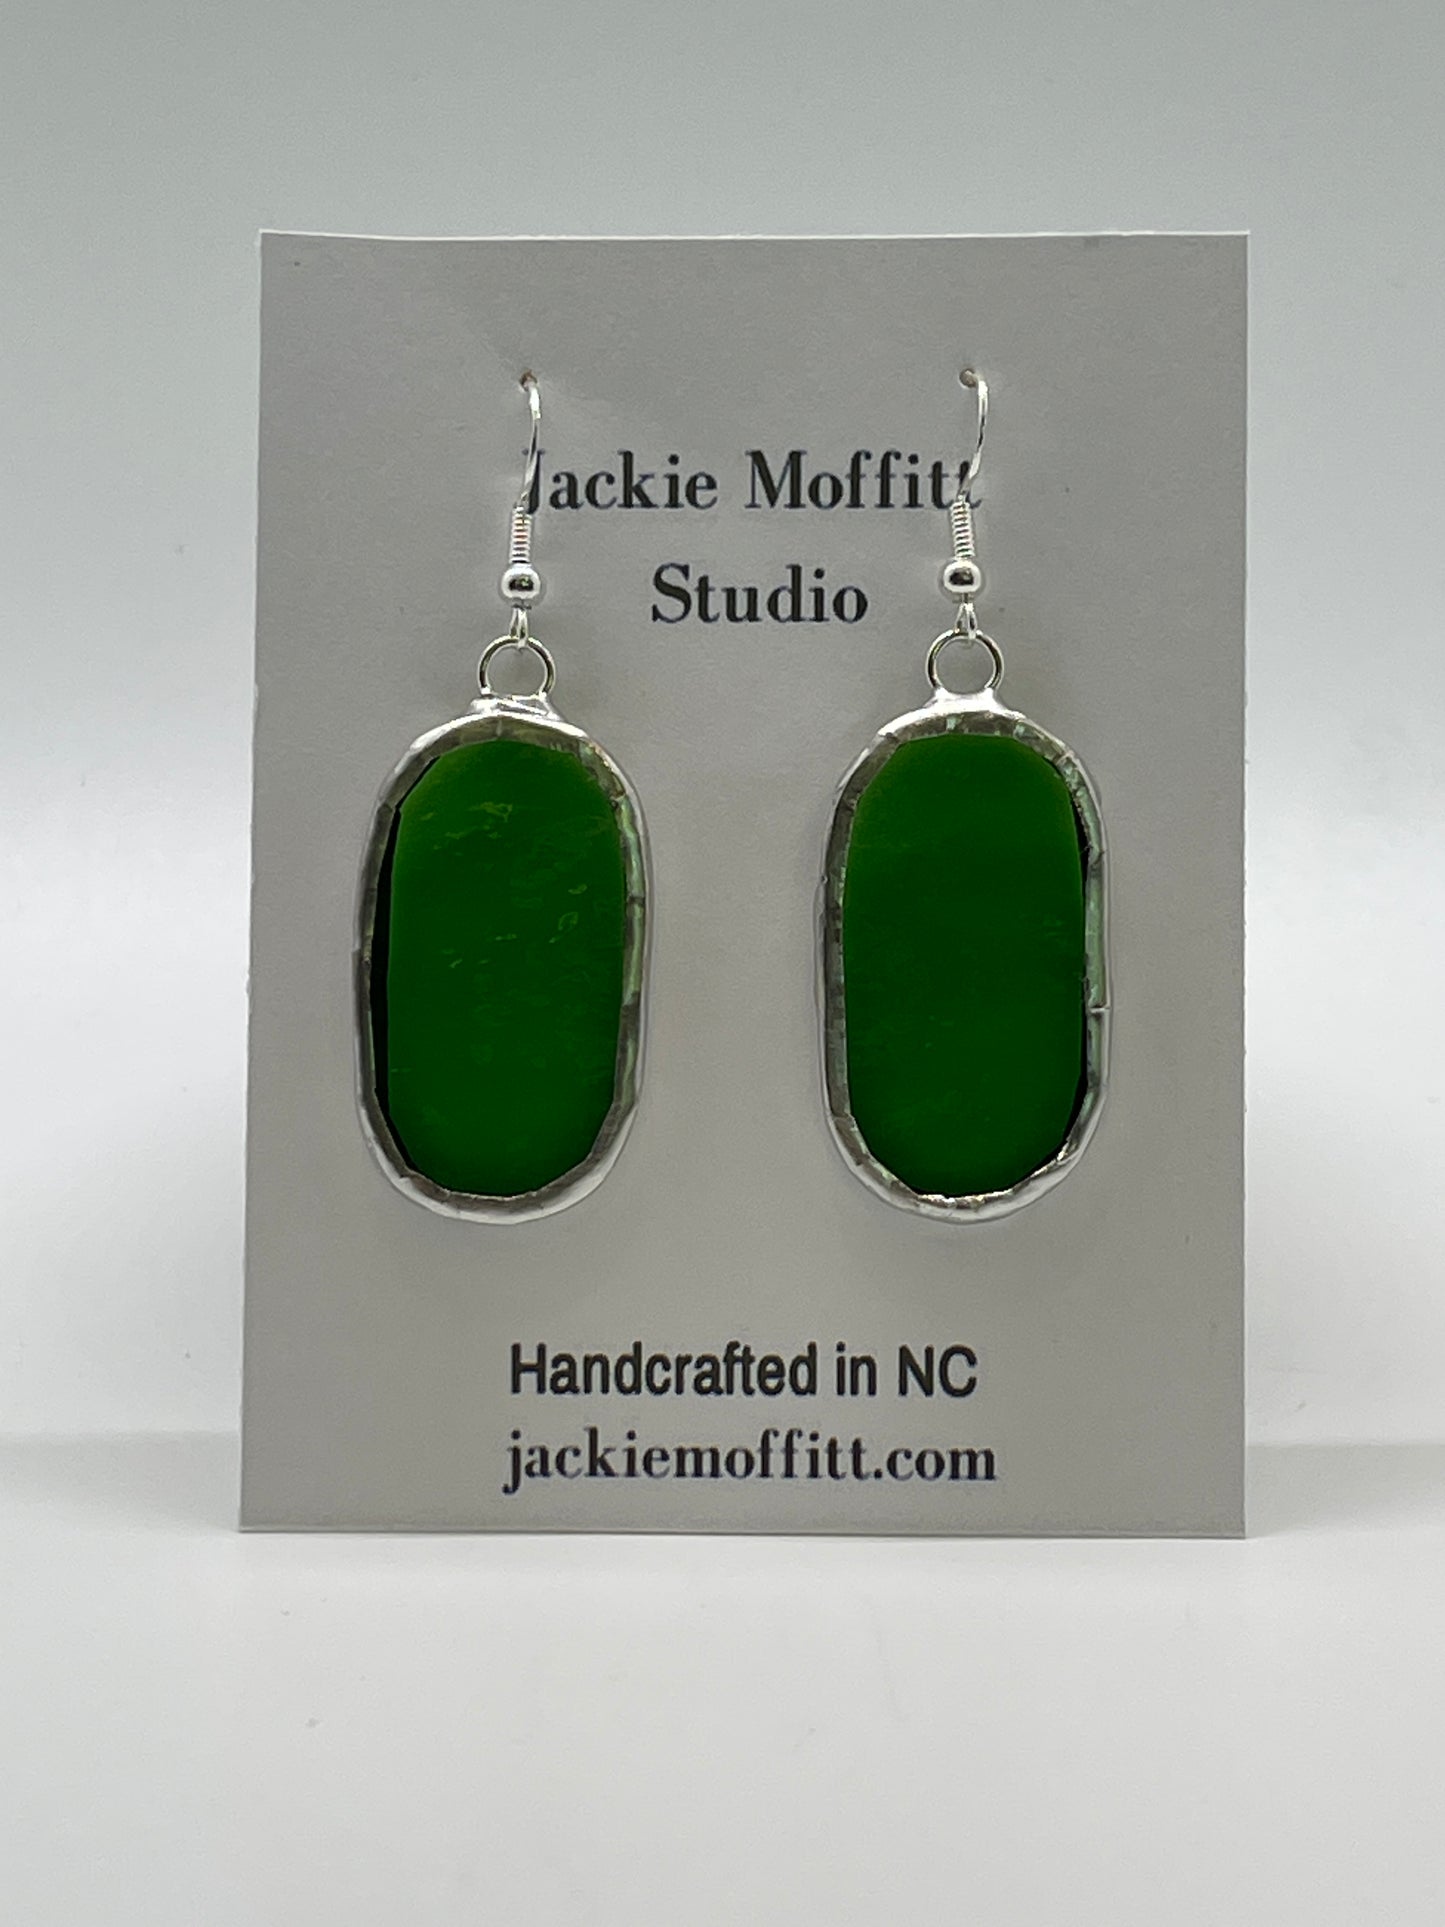 Stained Glass Earrings: Large Oval, Transparent Kelly Green